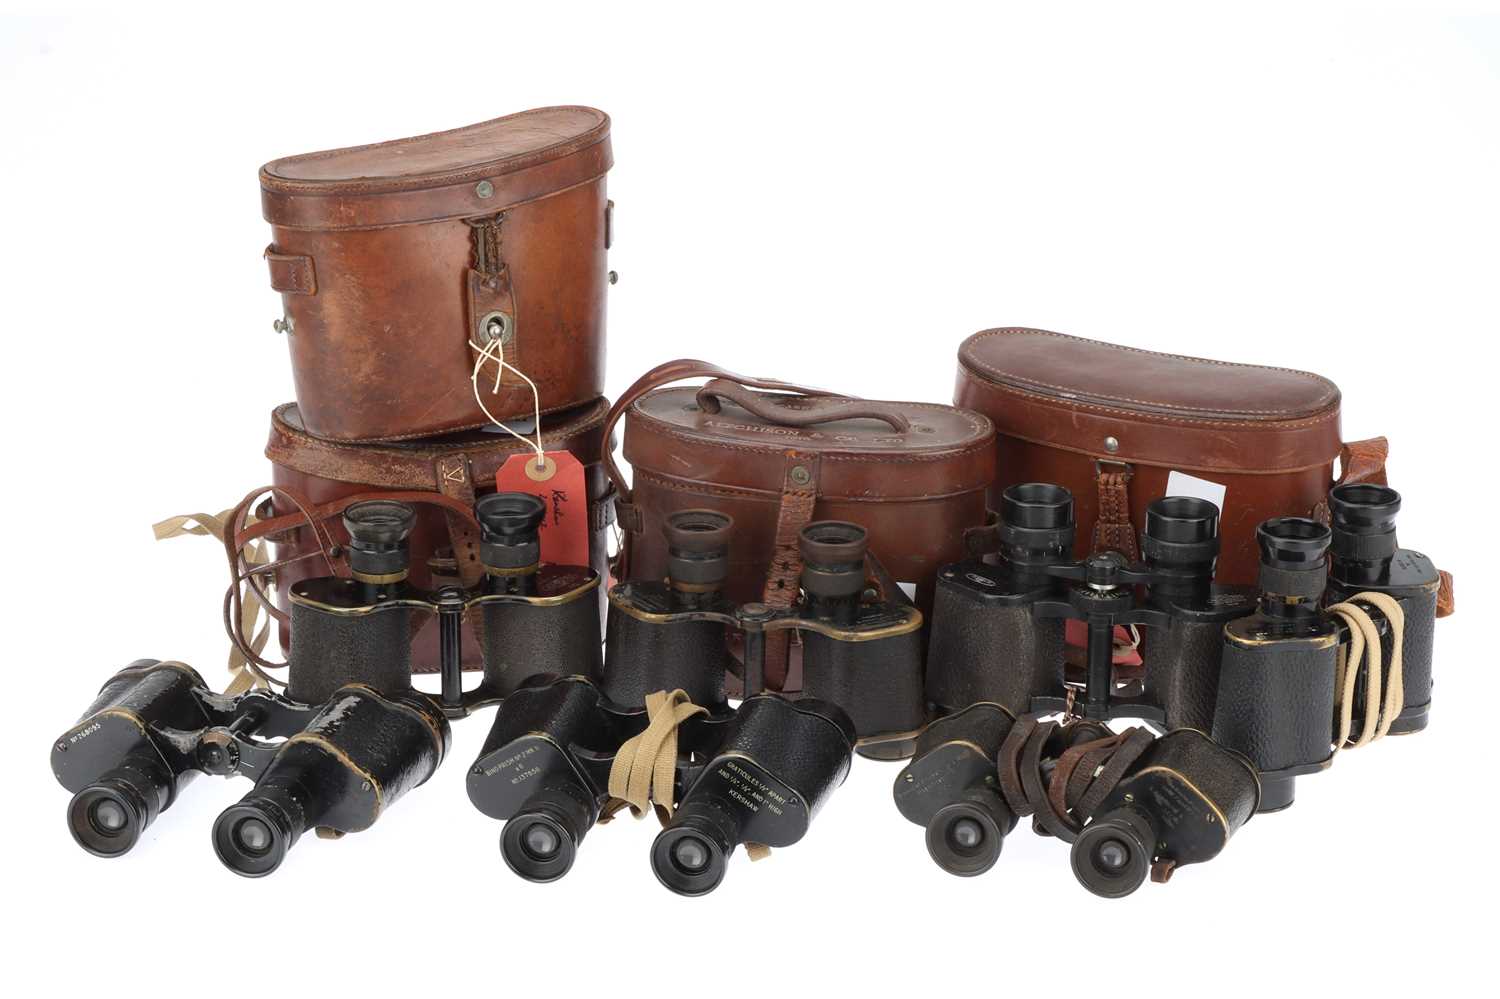 Lot 69 - A Large Collection of English Binoculars